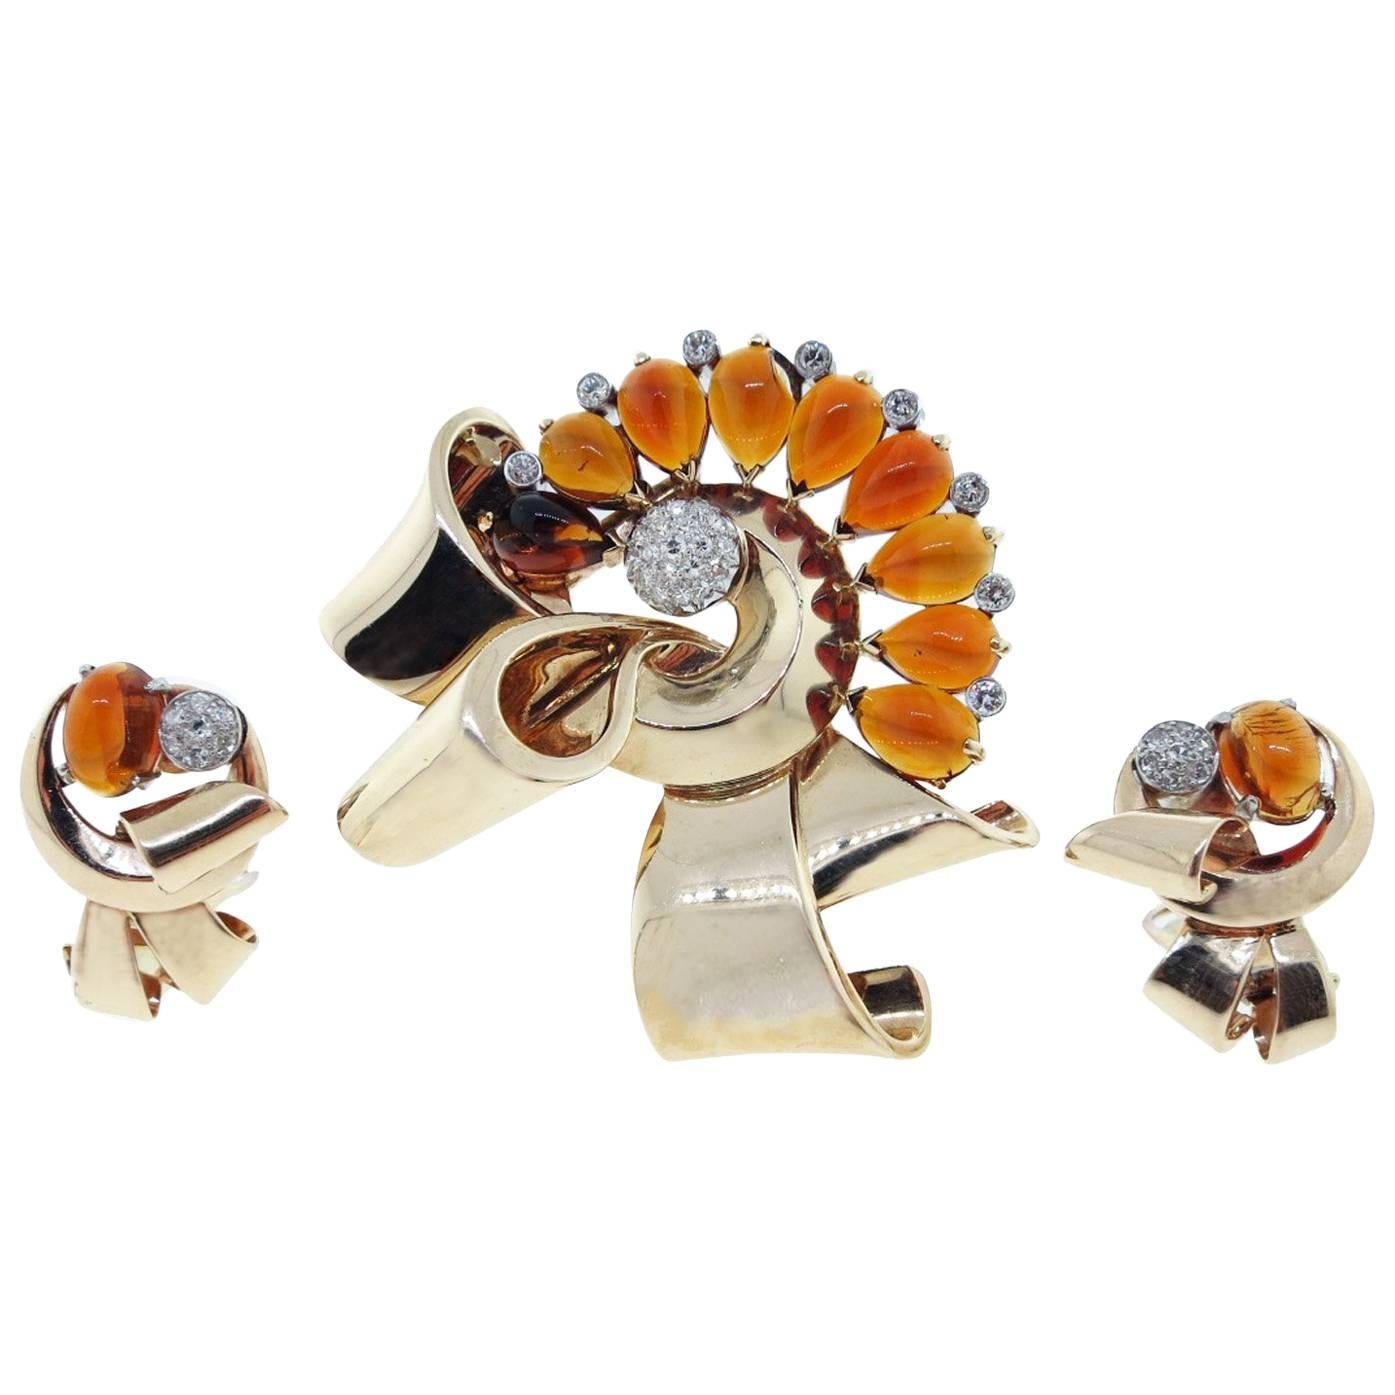 Powerful Retro Citrine and Diamond Brooch and Earring Set